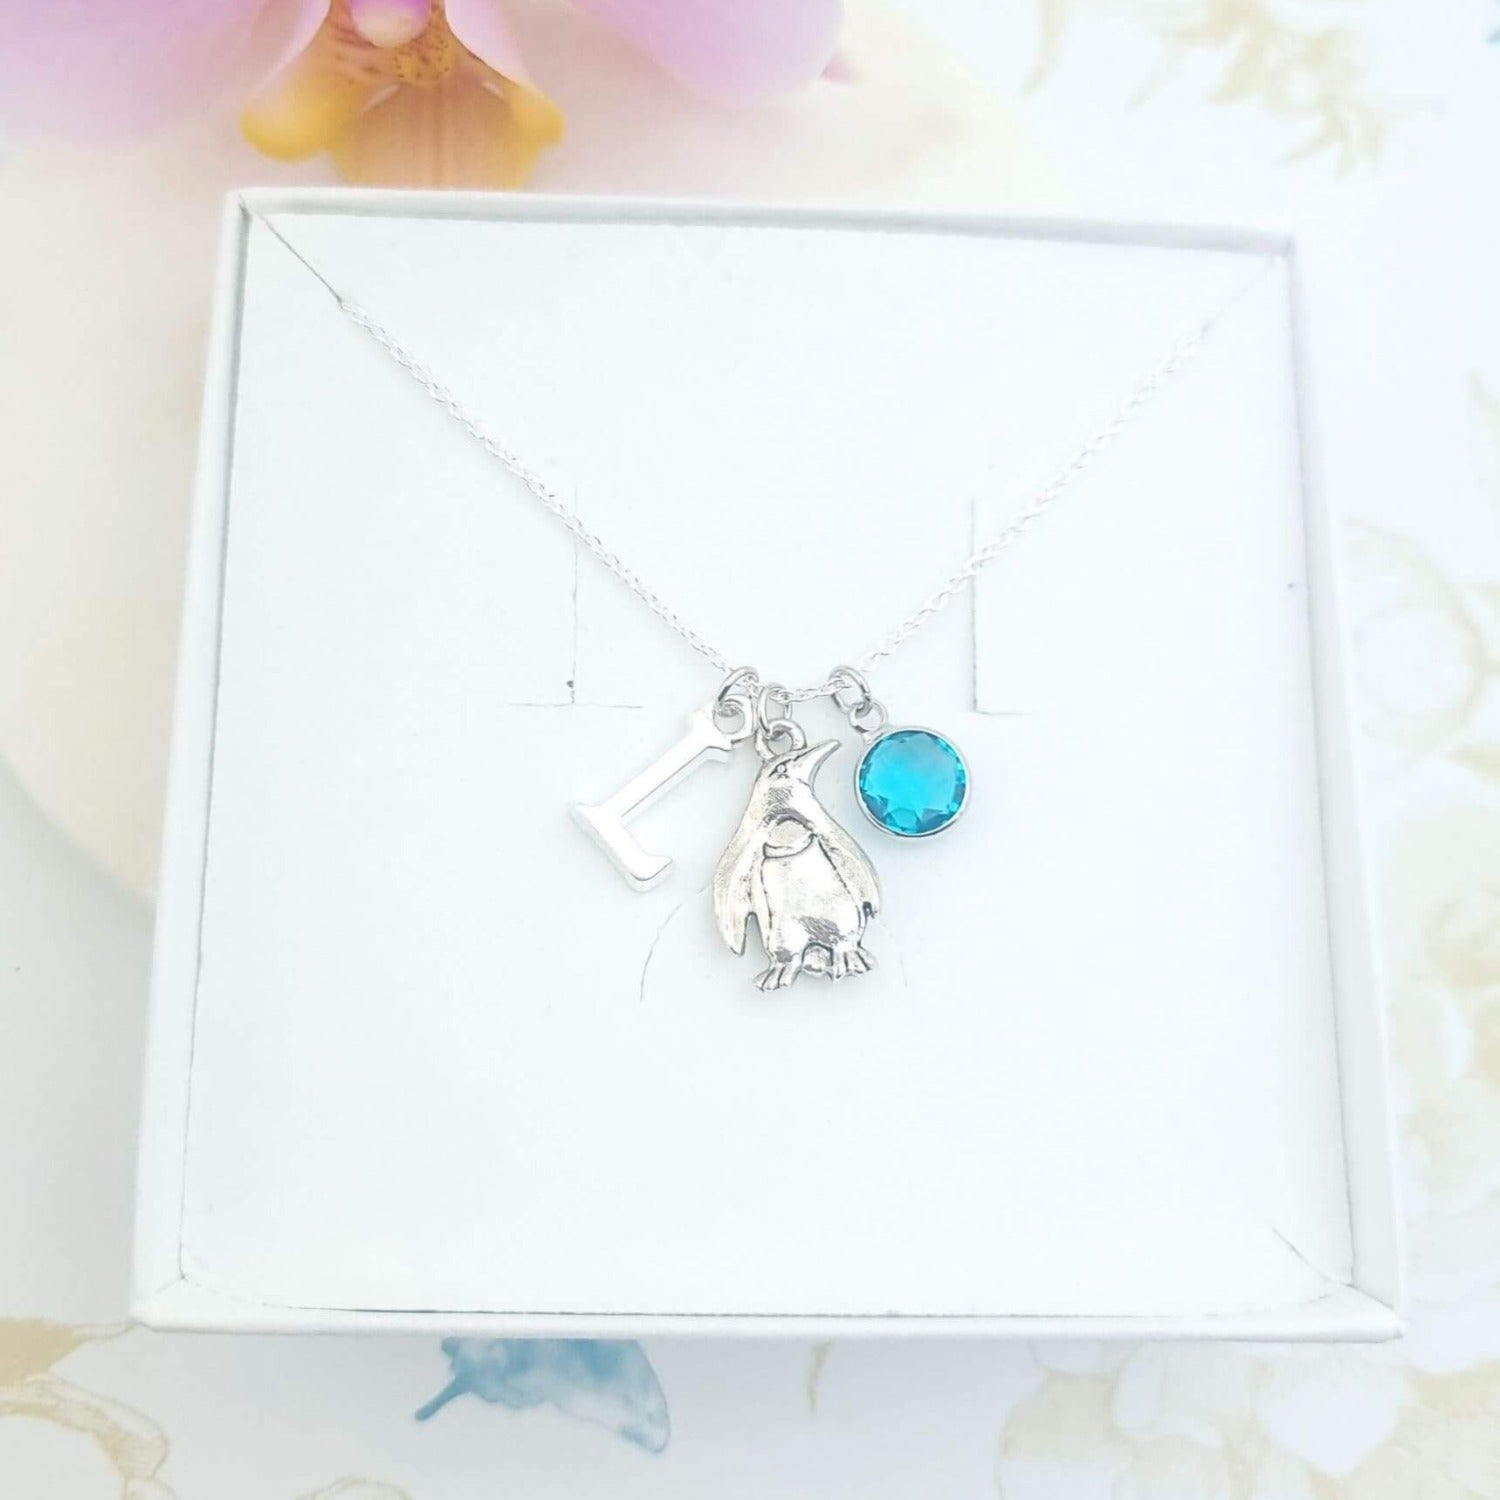 personalised penguin necklace